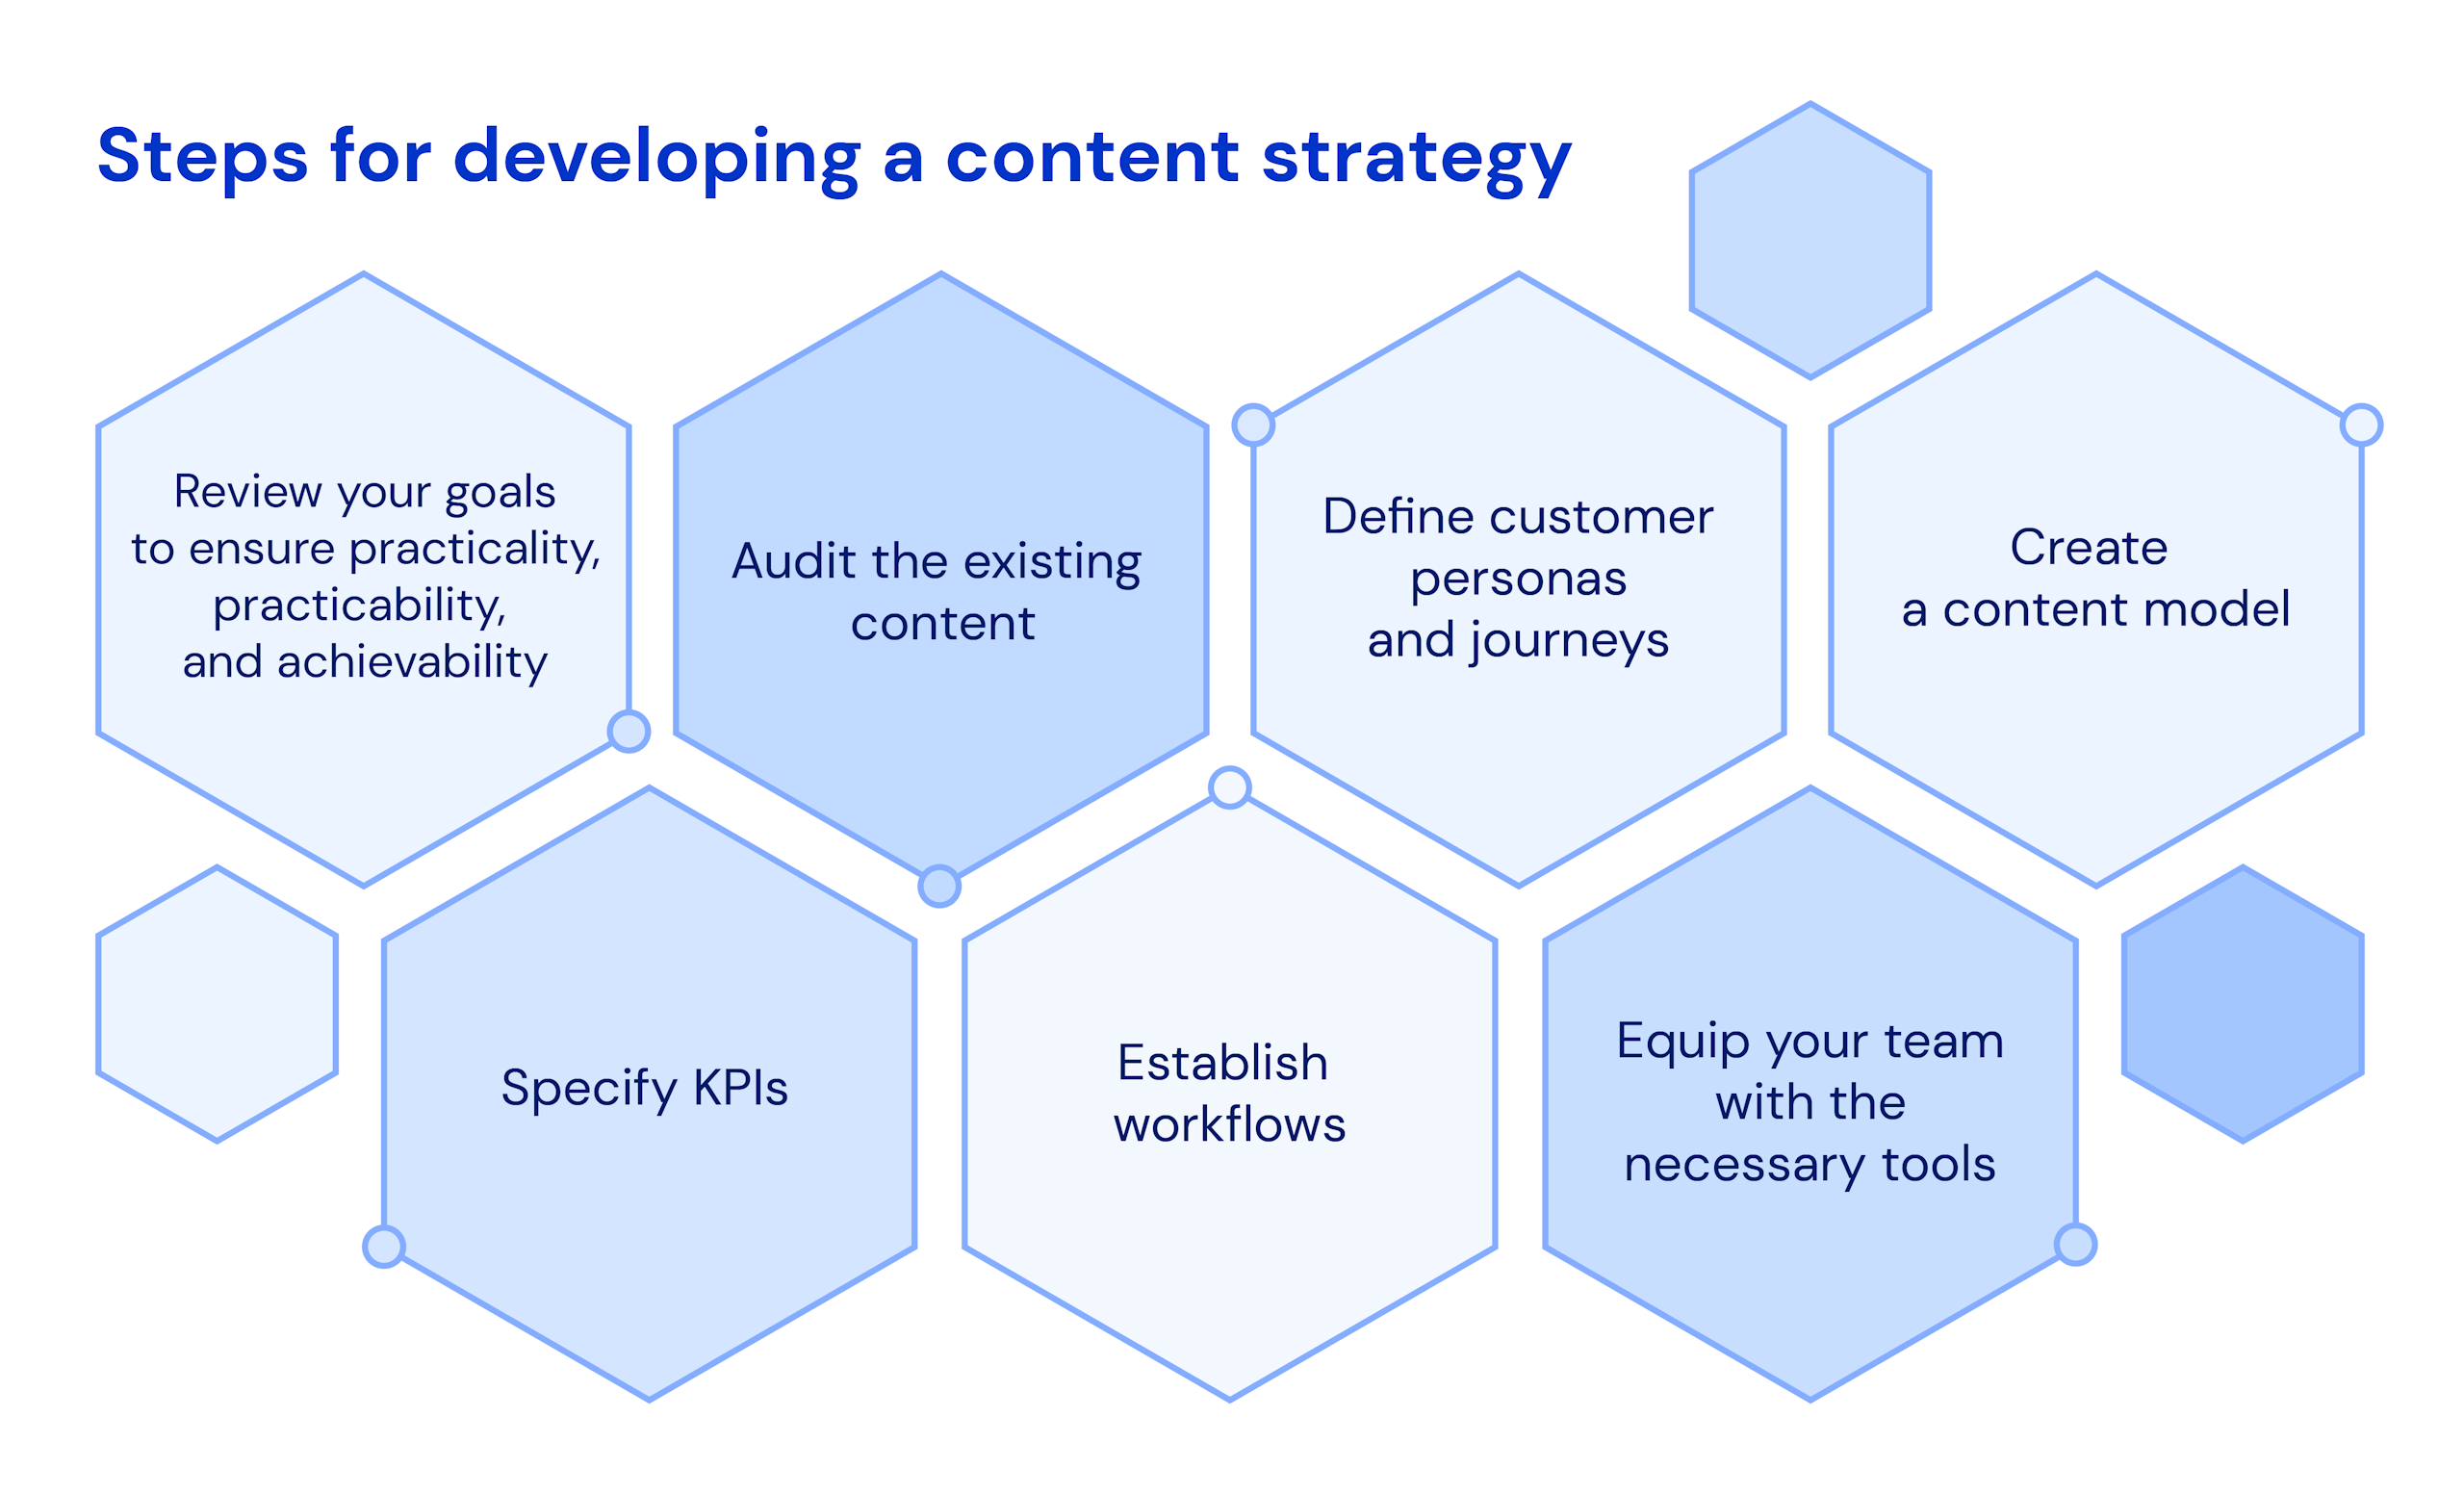 Steps for developing a content strategy